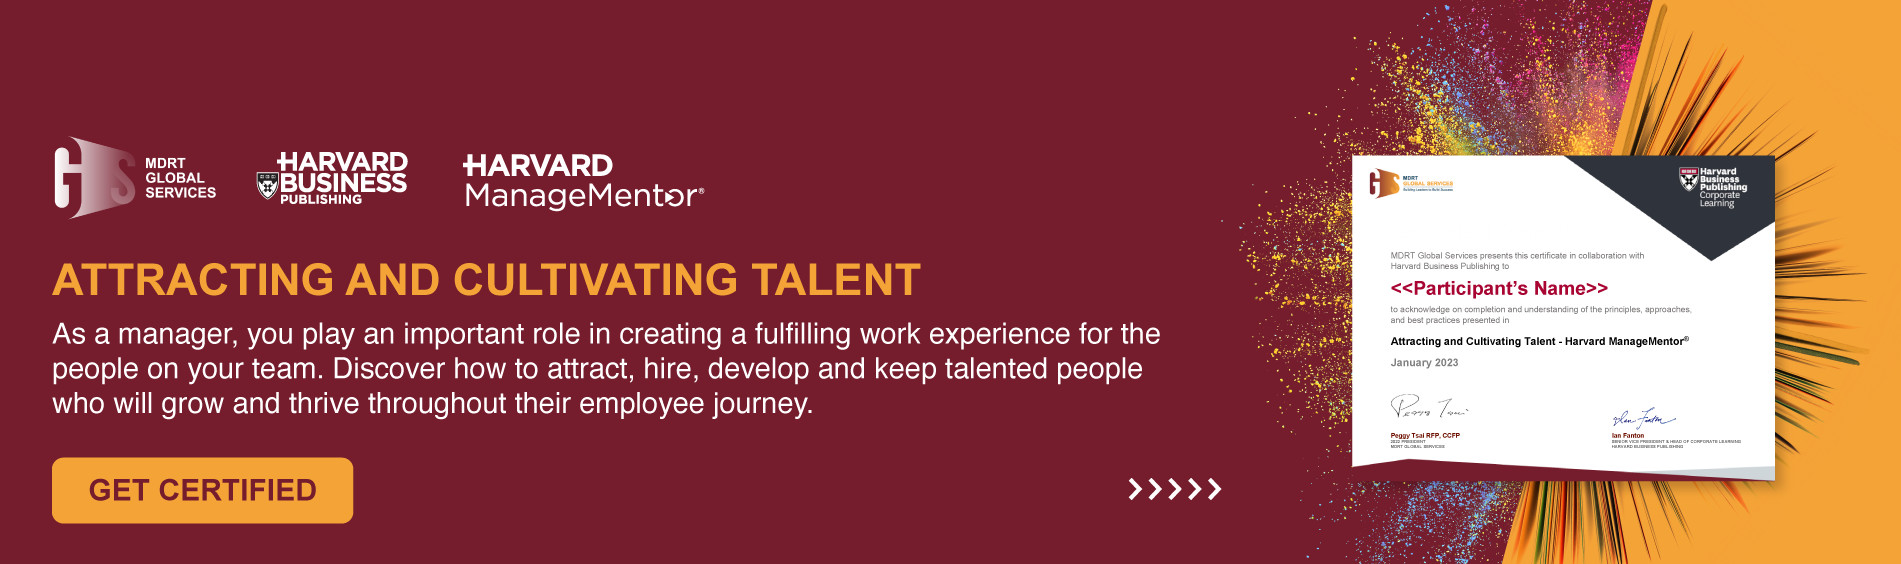 HMM Attracting and cultivating talent